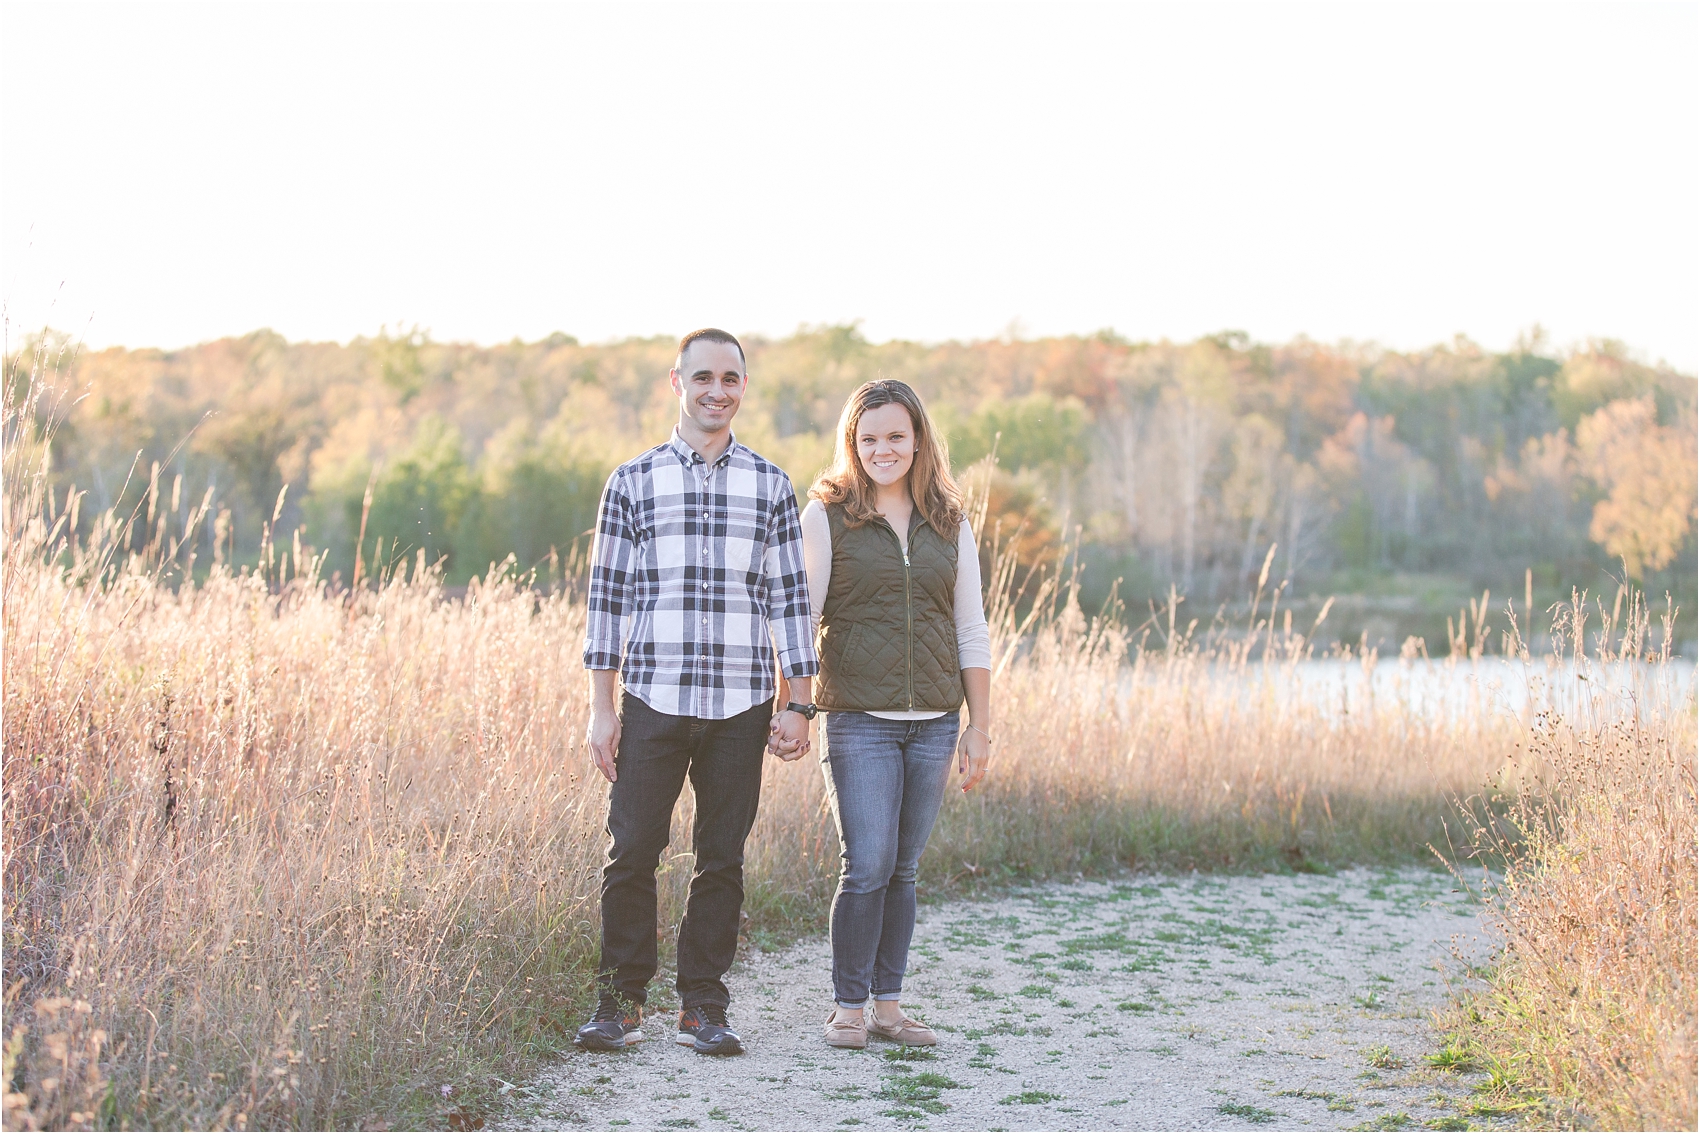 romantic-fall-engagement-photos-at-indian-springs-metropark-in-clarkston-mi-by-courtney-carolyn-photography_0020.jpg